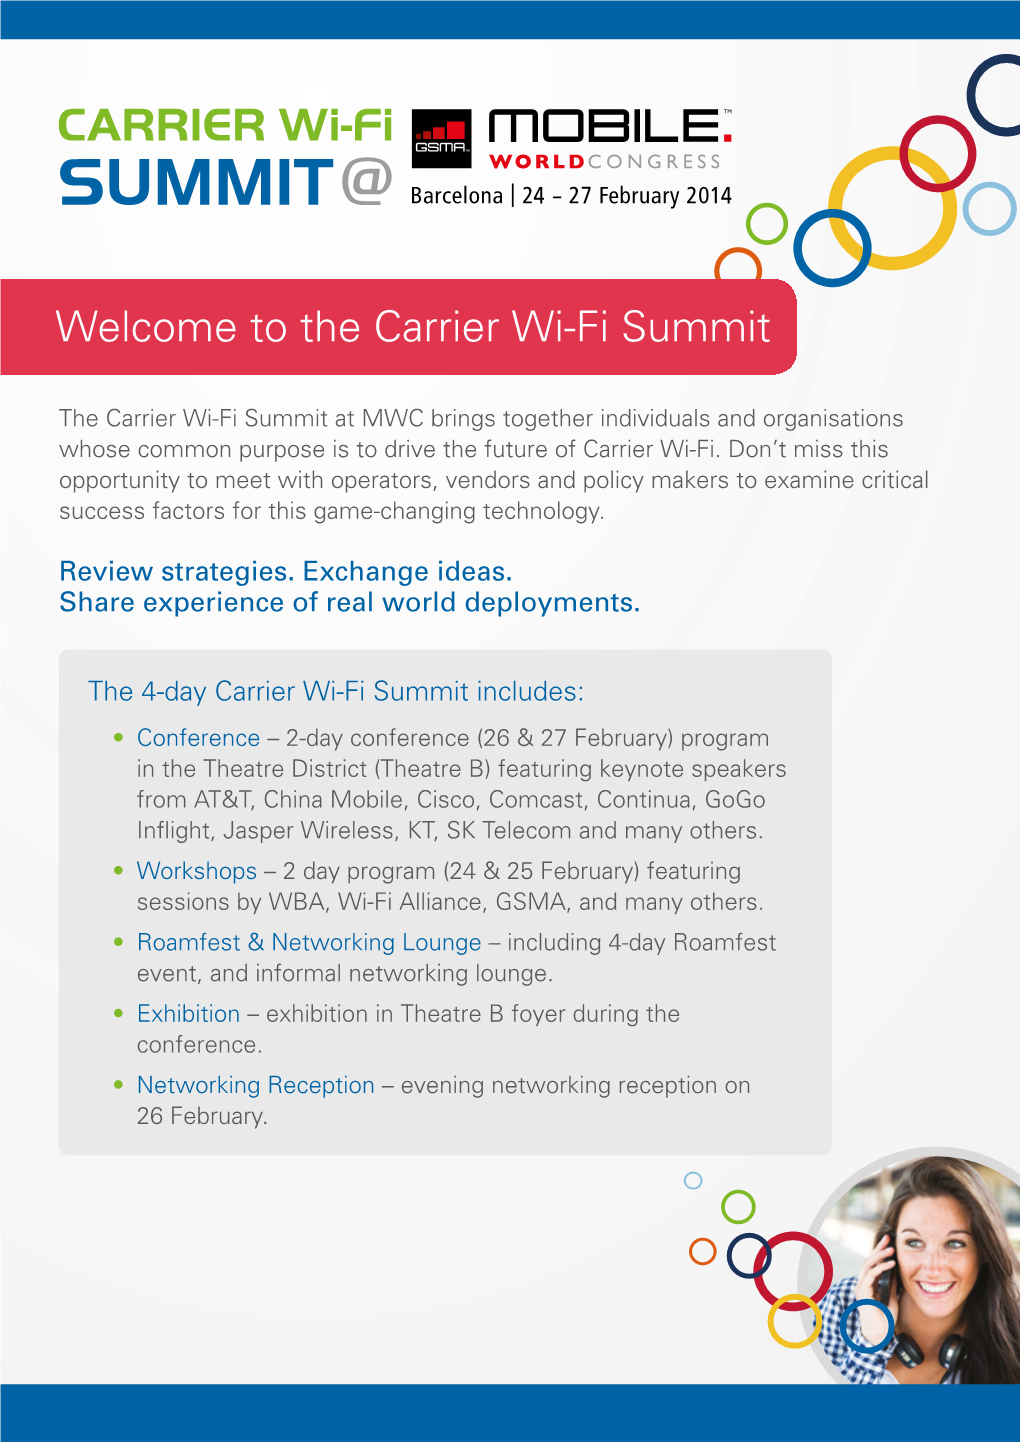 The Carrier Wi-Fi Summit